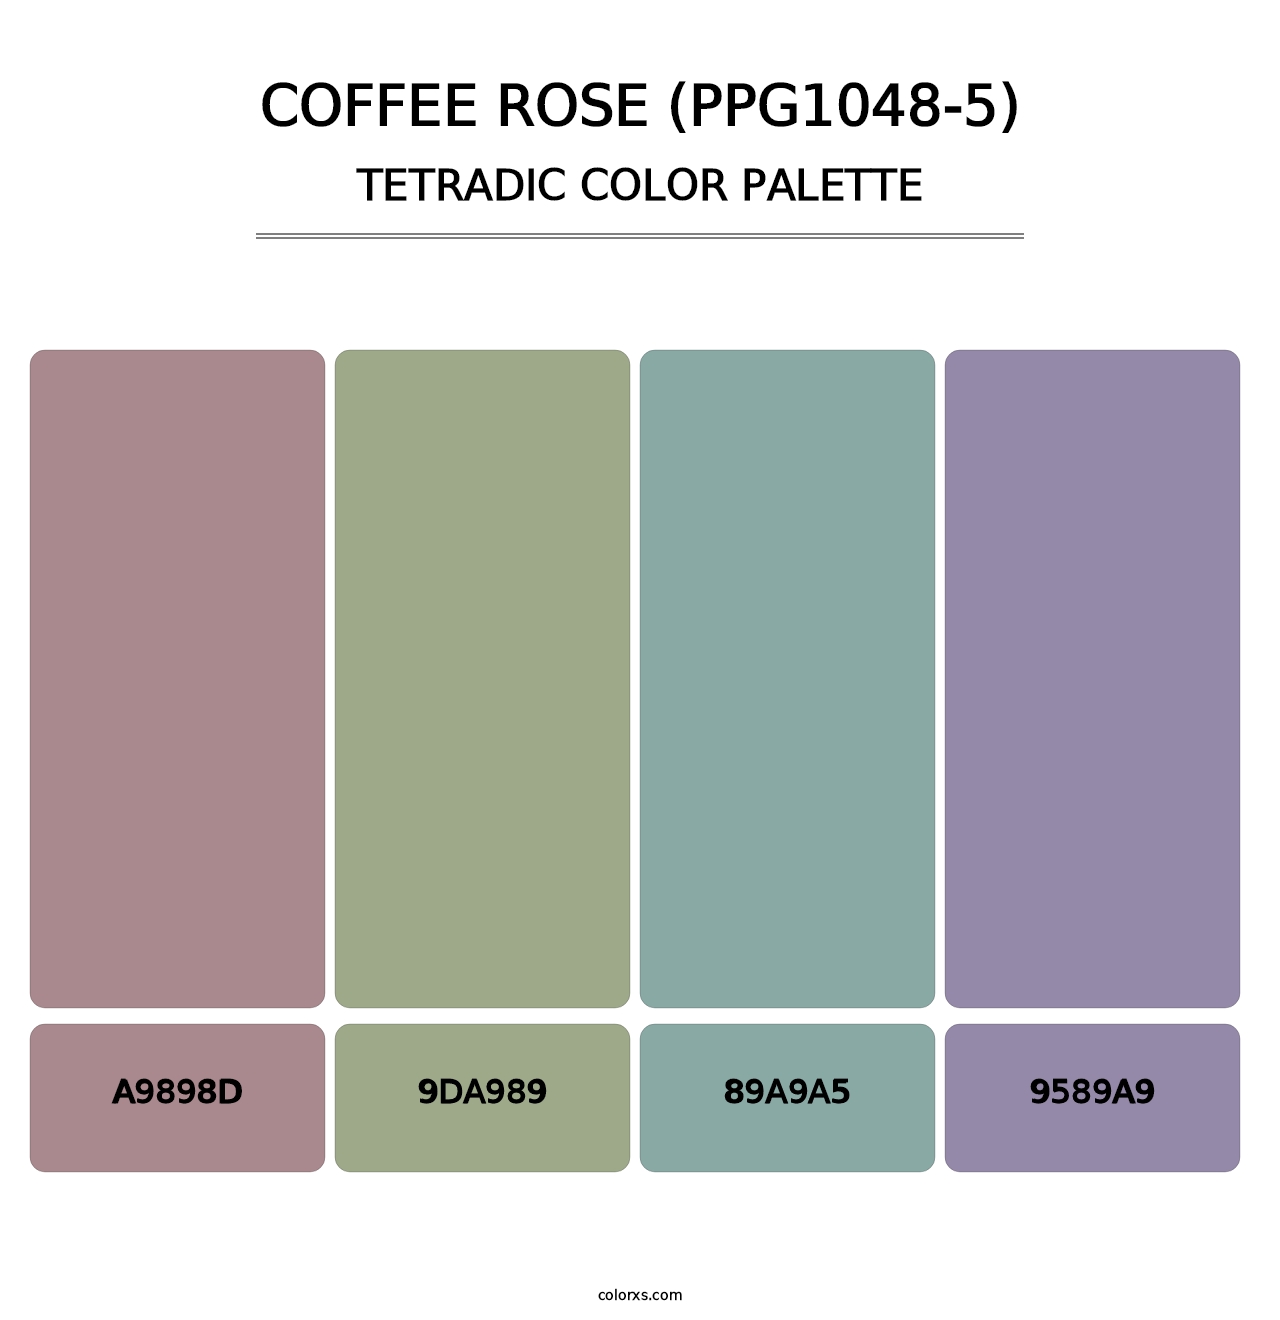 Coffee Rose (PPG1048-5) - Tetradic Color Palette